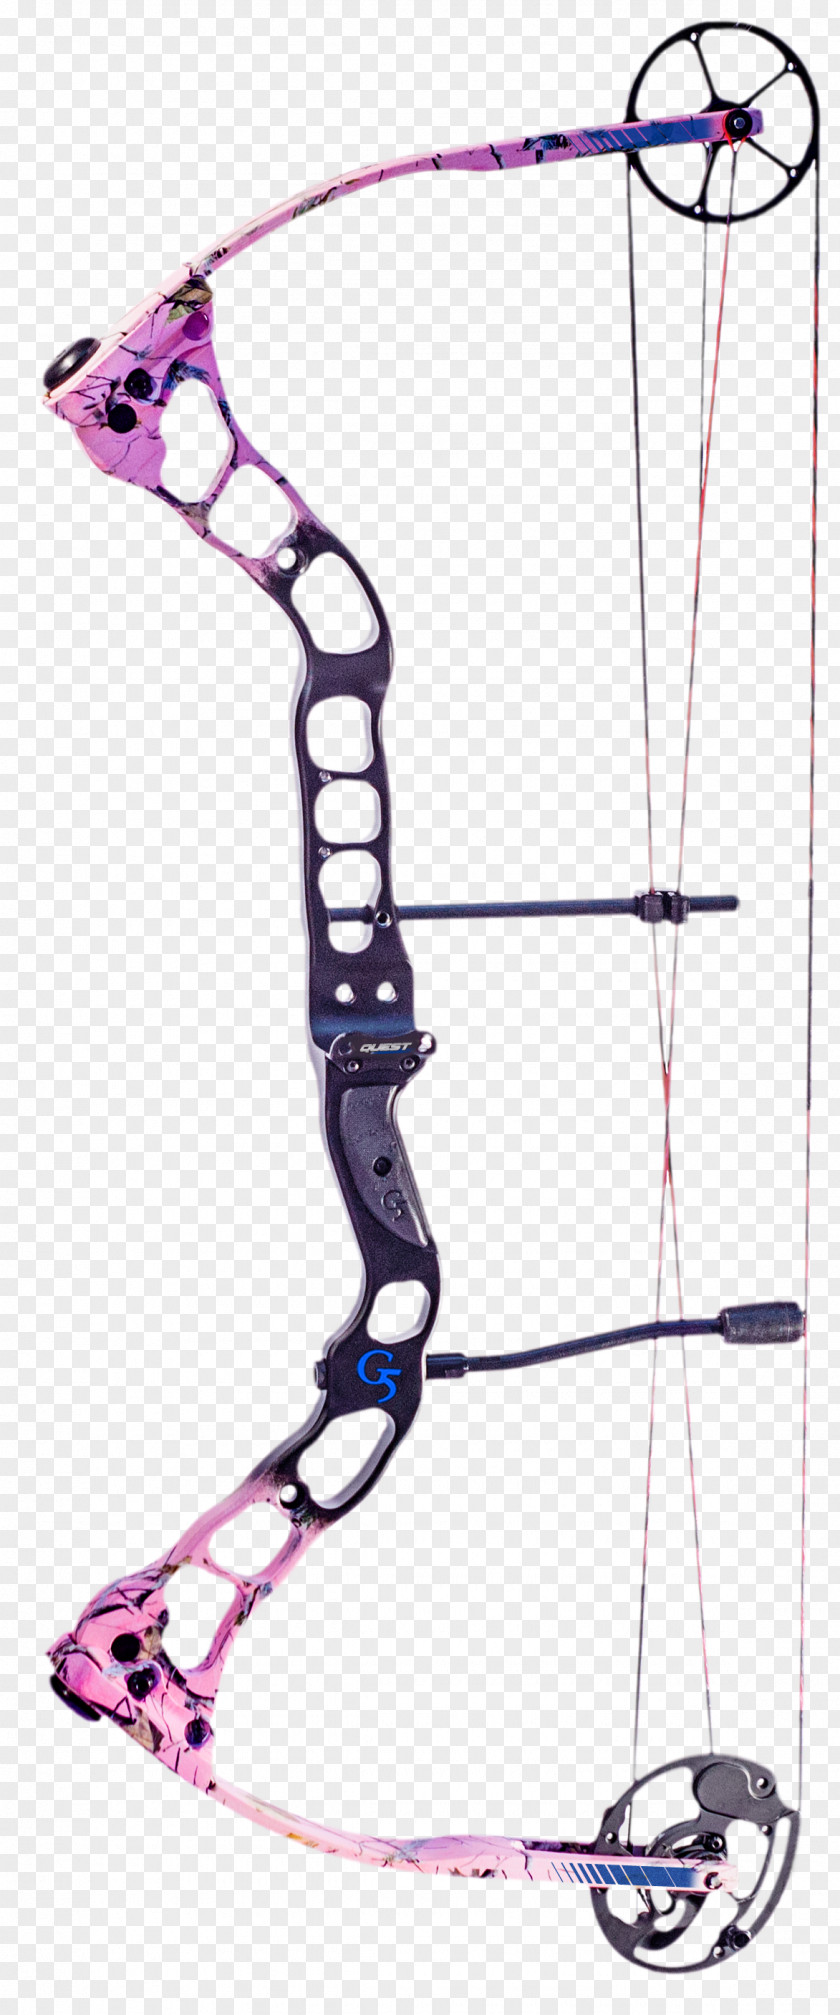 Compound Bows Bowhunting Bow And Arrow Archery PNG